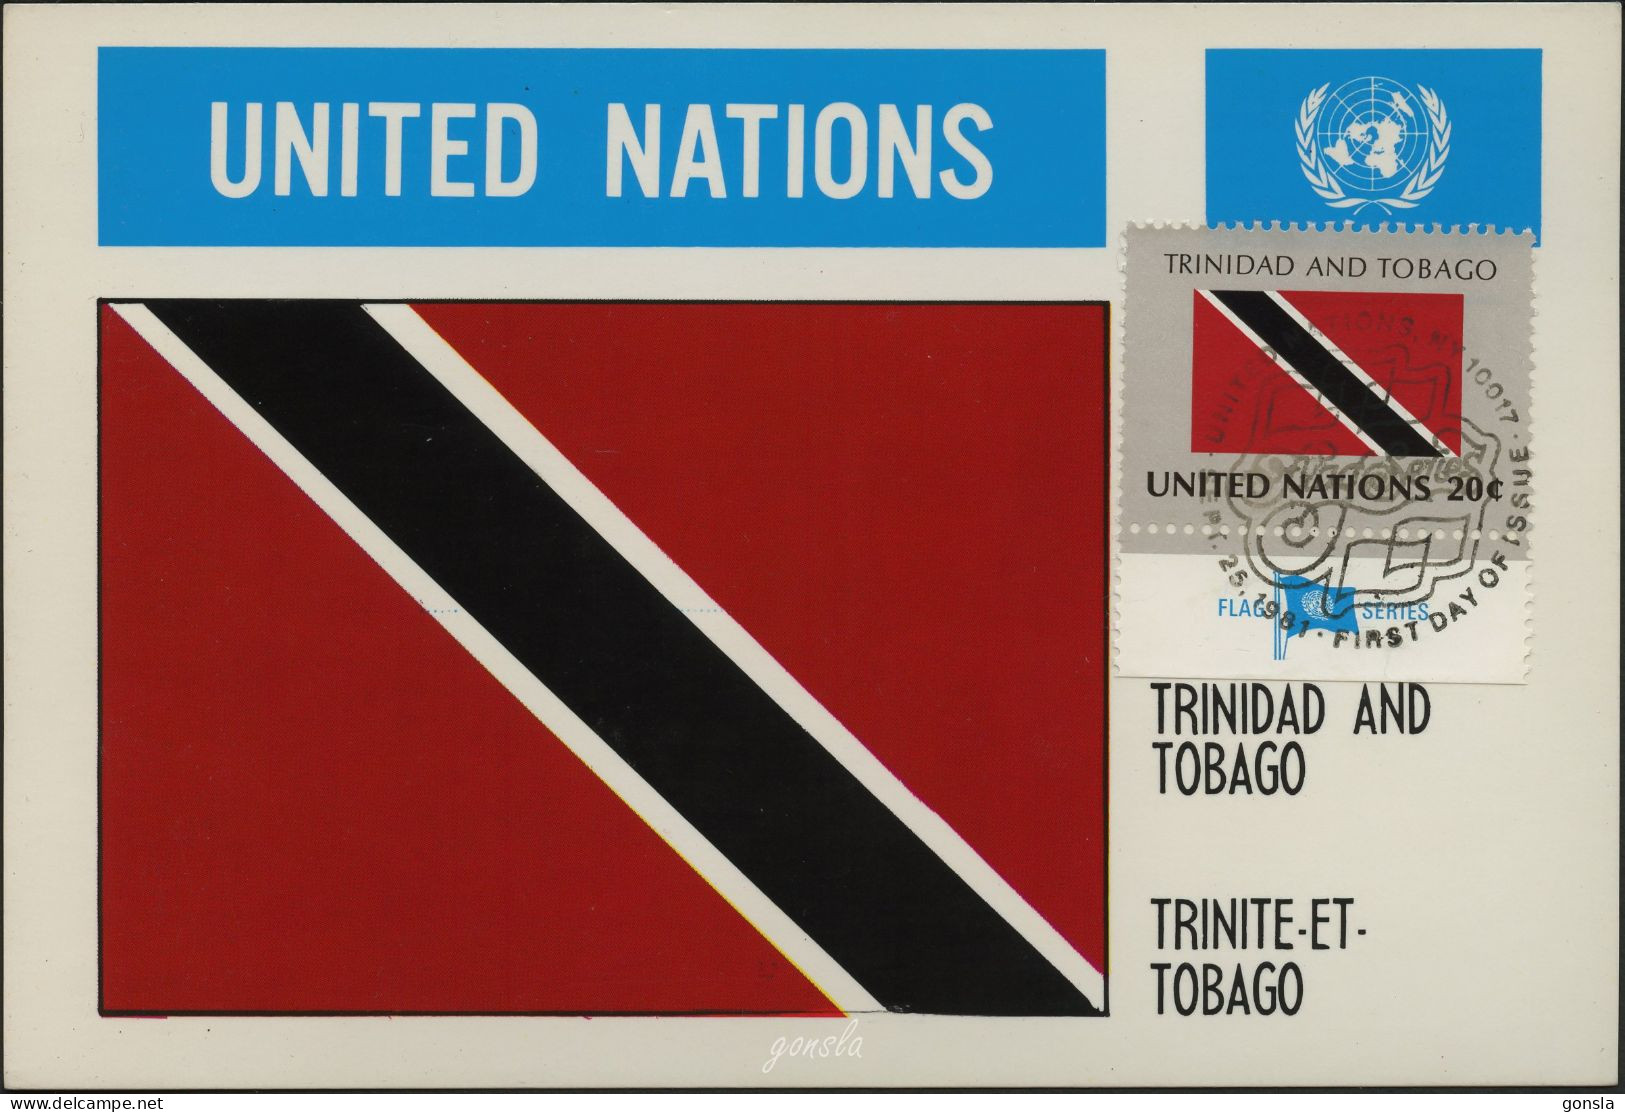 TRINIDAD AND TOBAGO 1981 "UNITED NATIONS" First Days Of Issue - Stamps (pictures)